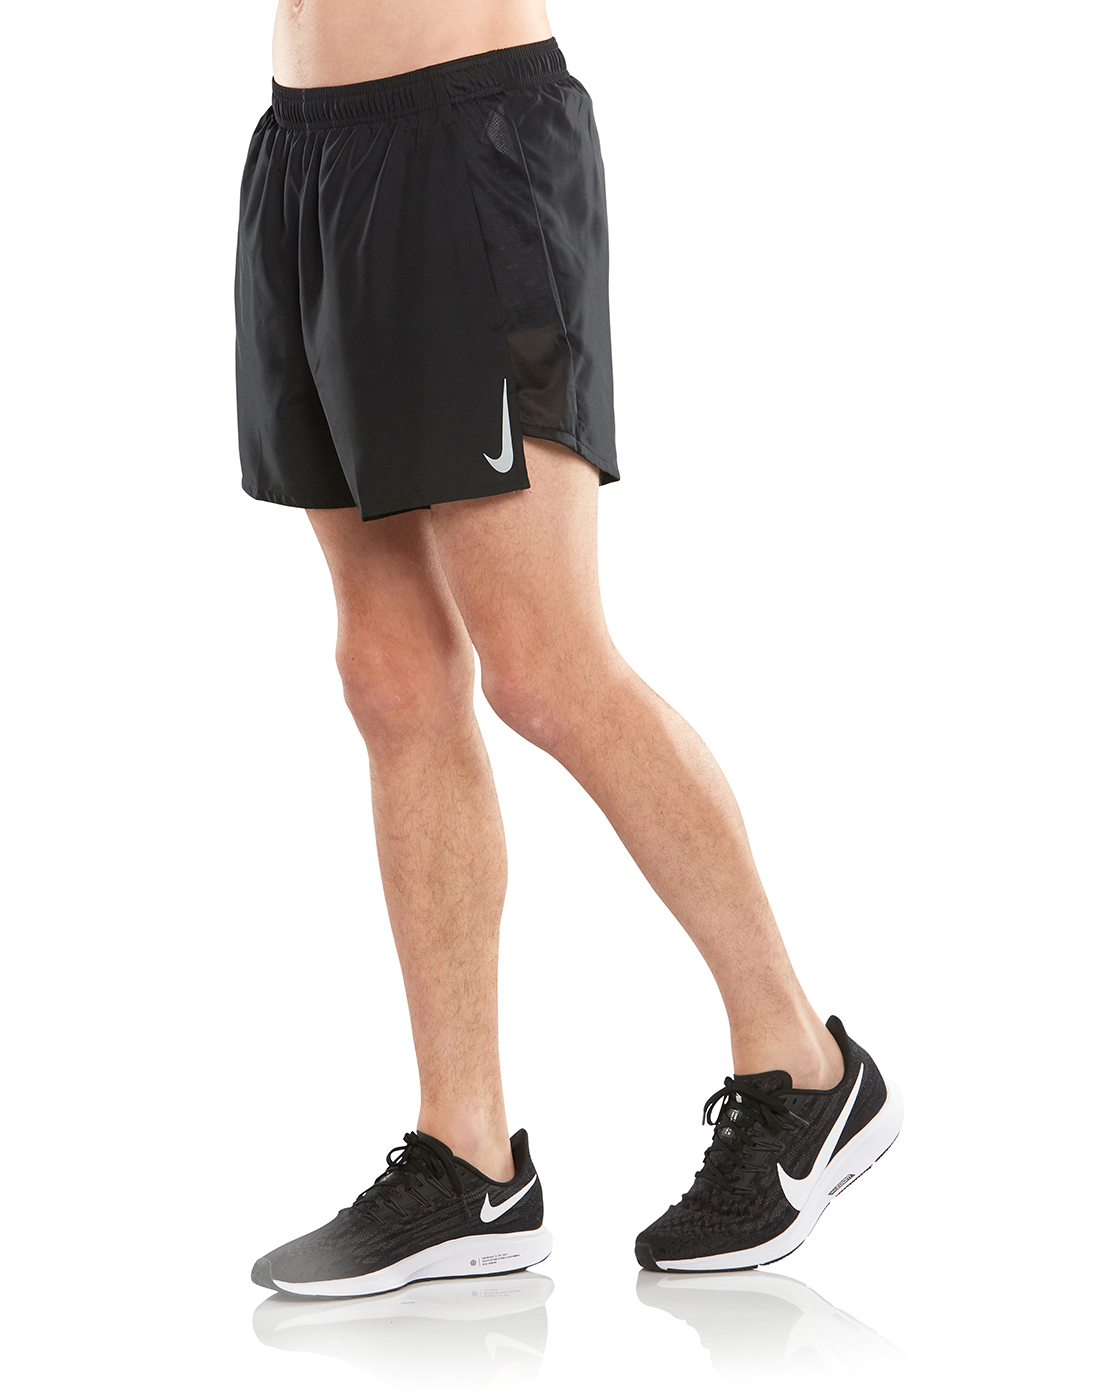 Nike Mens Challenger 7 Inch Shorts 